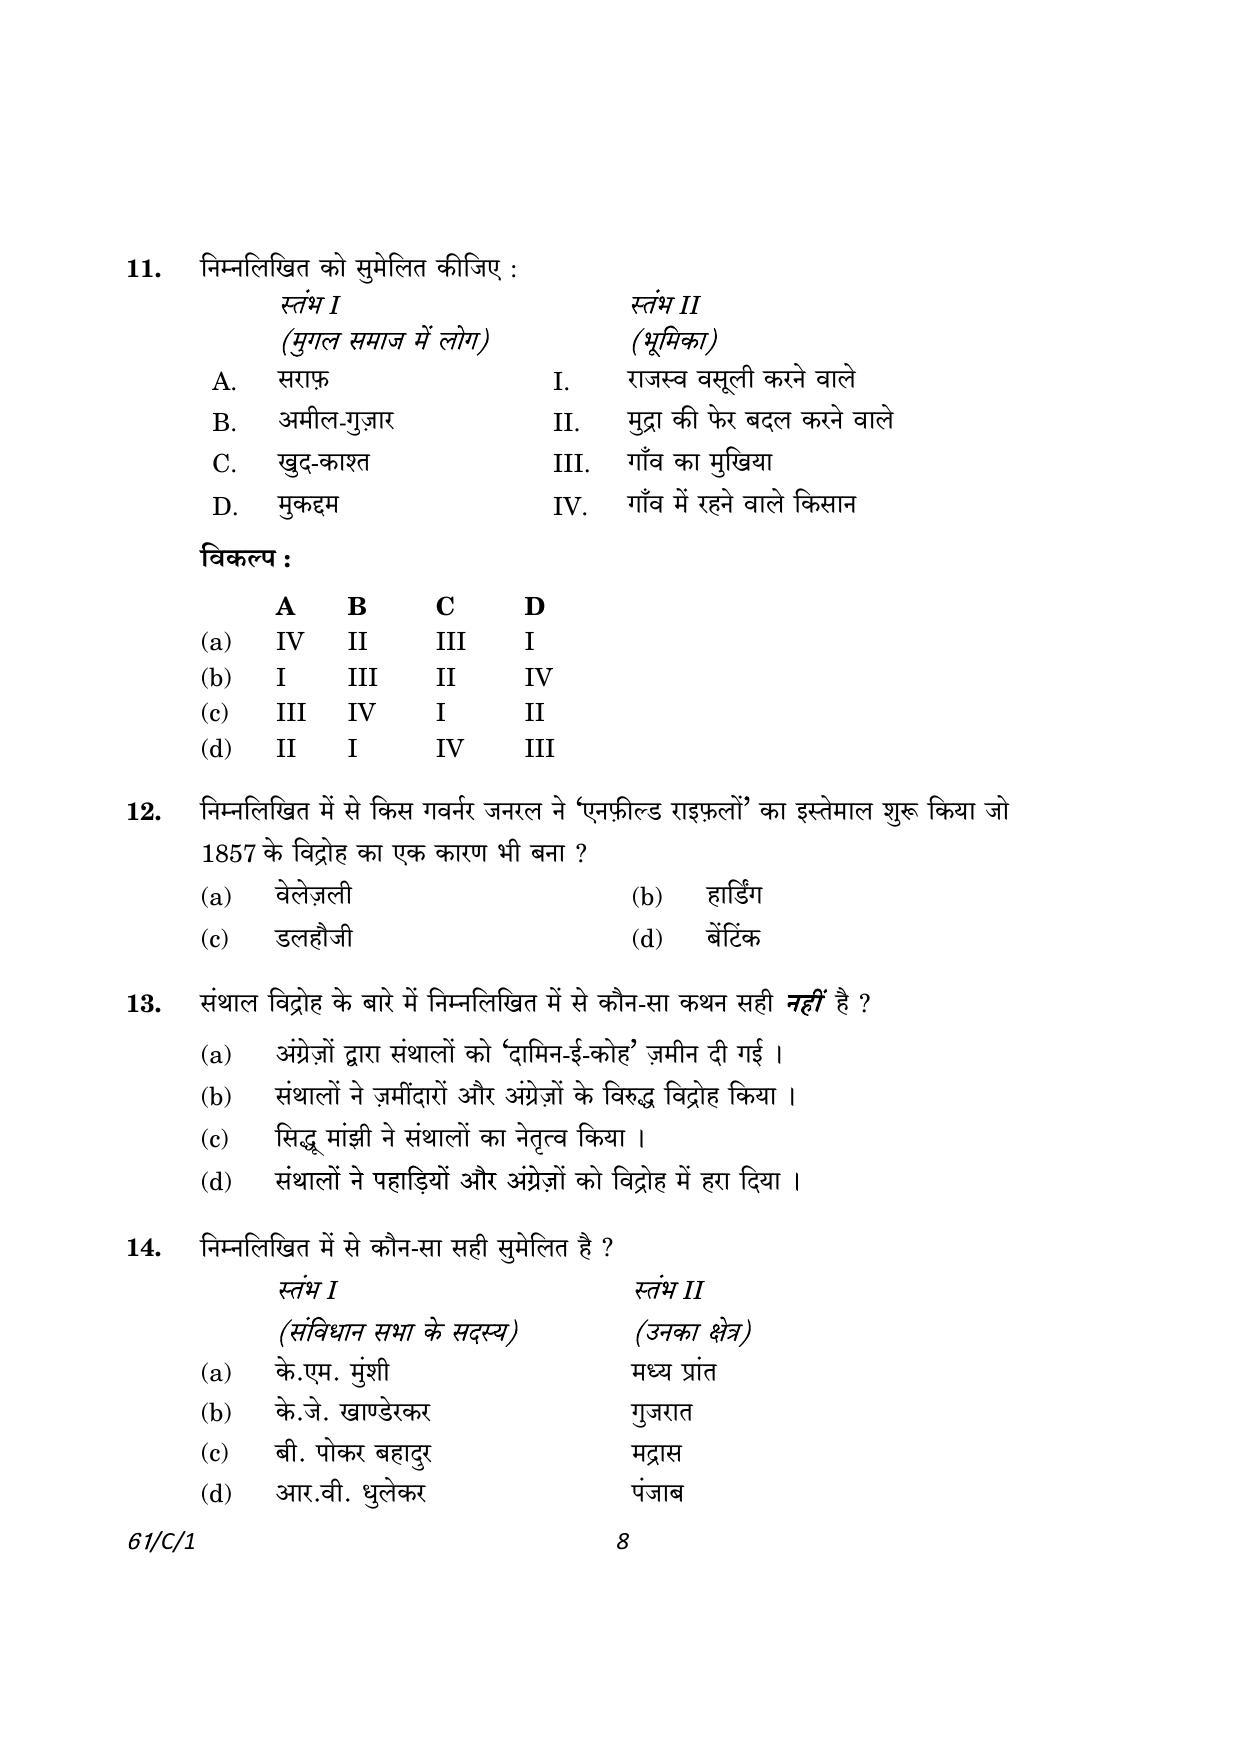 CBSE Class 12 61-1 History 2023 (Compartment) Question Paper - Page 8